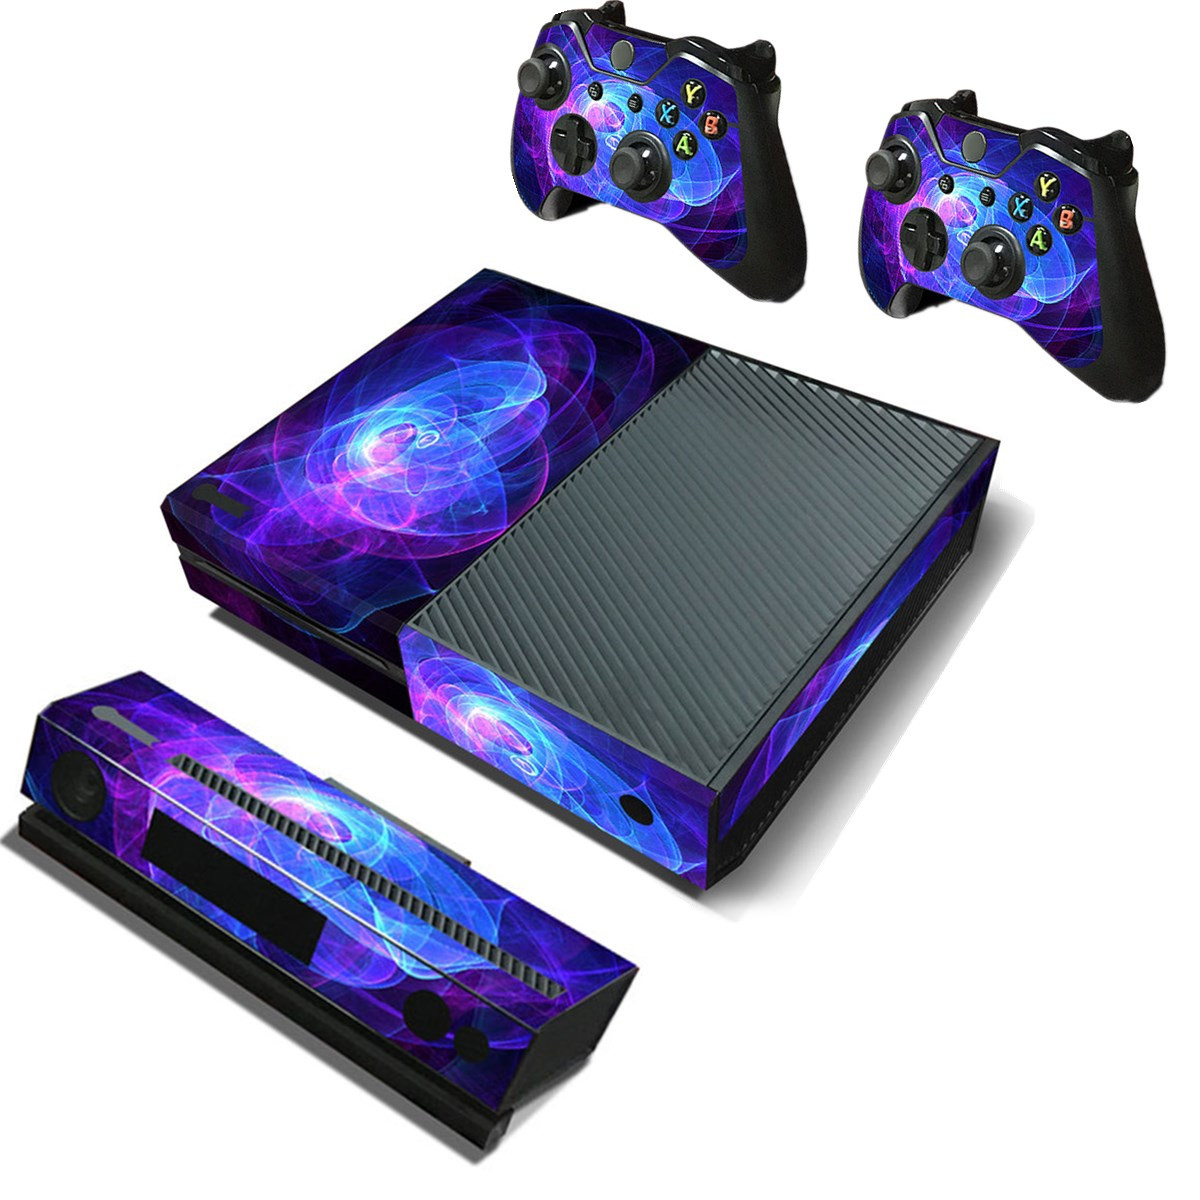 Purple Protective Vinyl Decal Skin Stickers Wrap Cover For Xbox One Game Console Game Controller Kinect 12